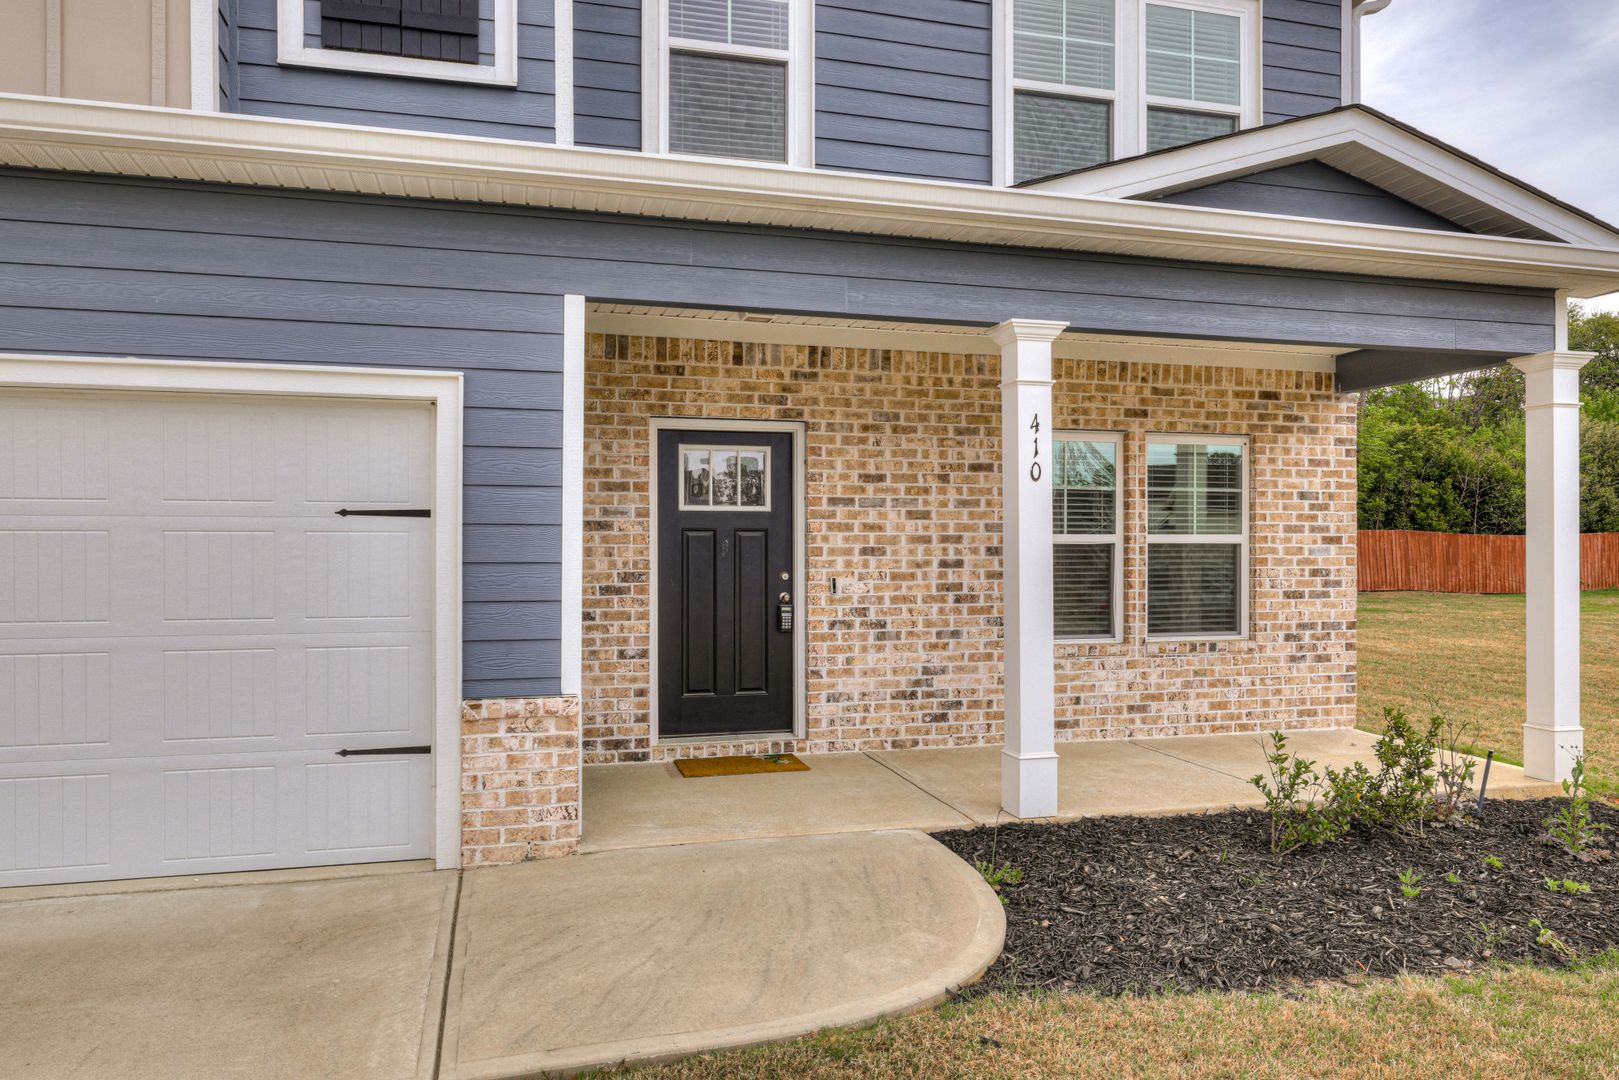 Comfort and convenience in this 4 bedroom home, full of amenities in John's Landing!